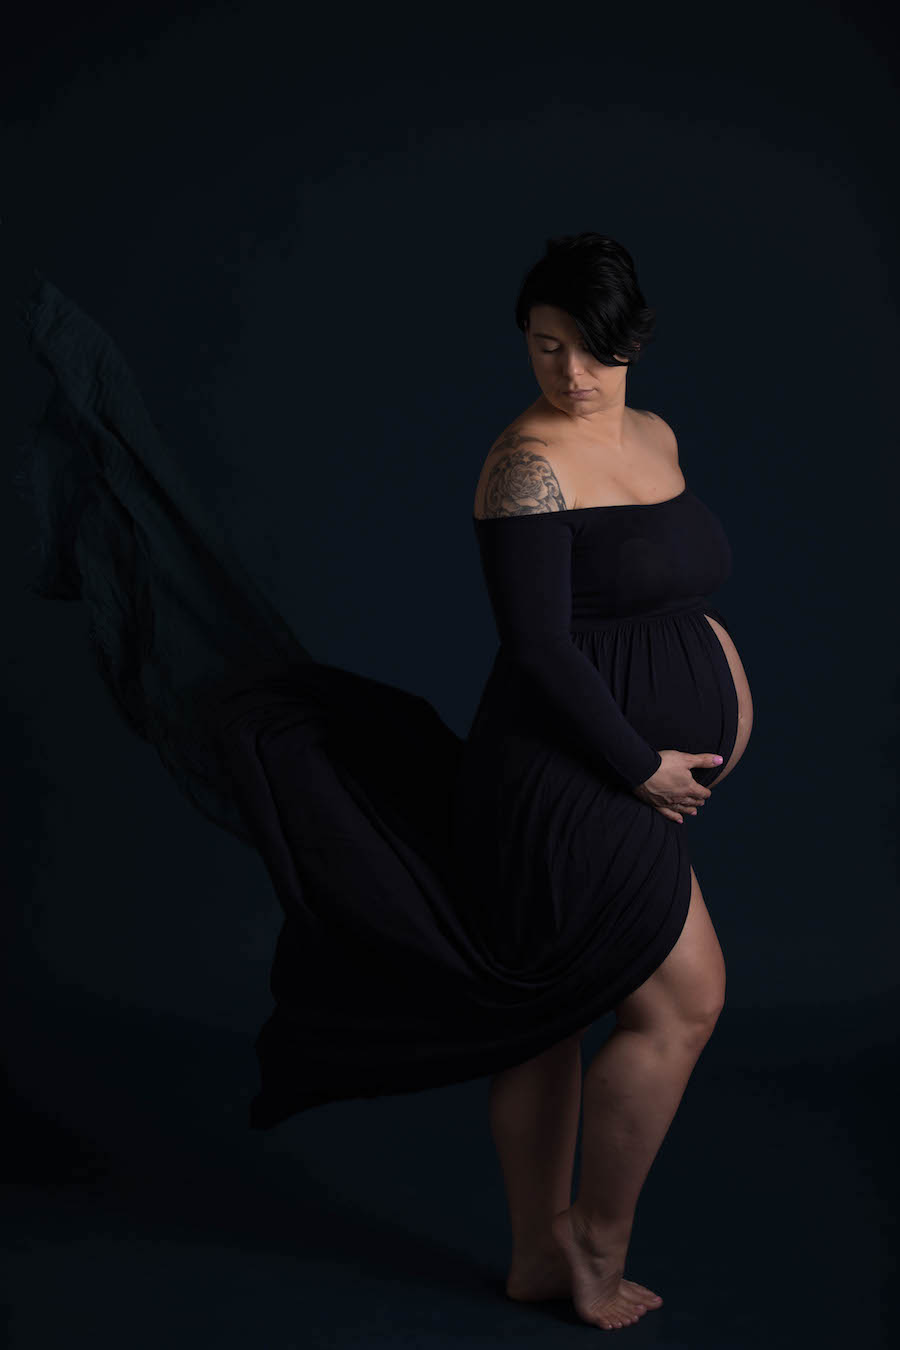 Pregnant woman in flowing dress